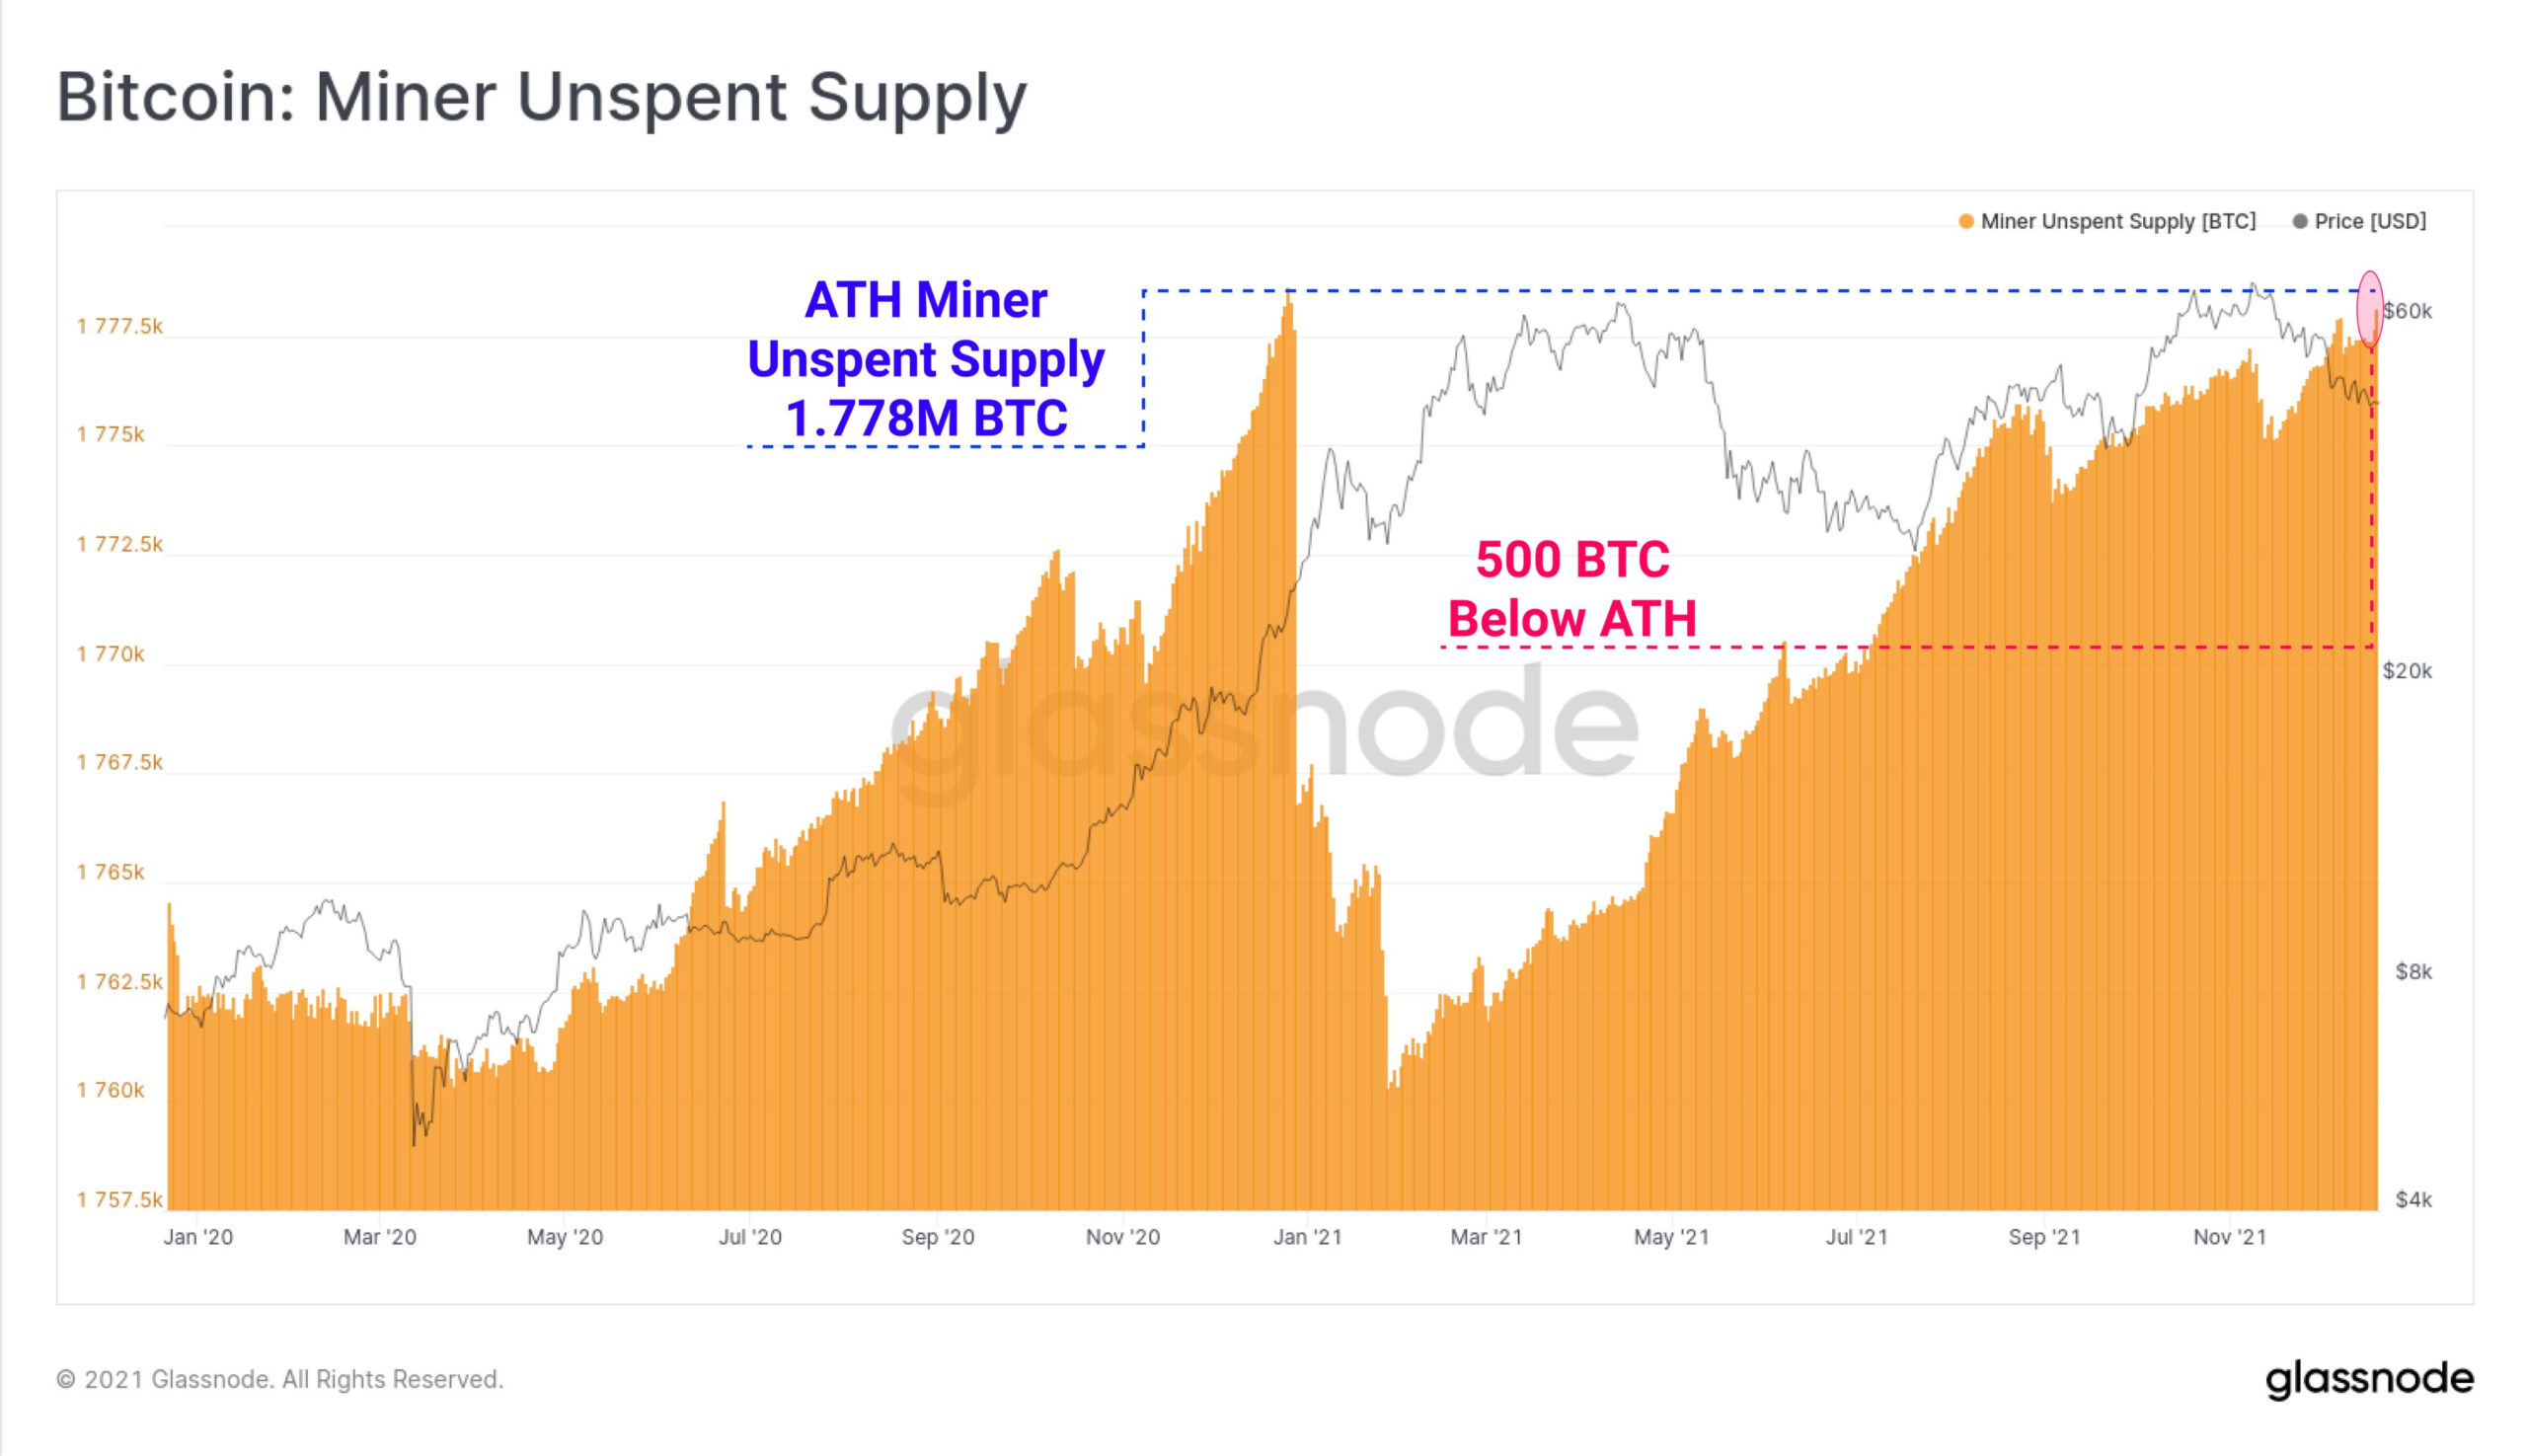  miners unspent bitcoin all-time high continue holding 